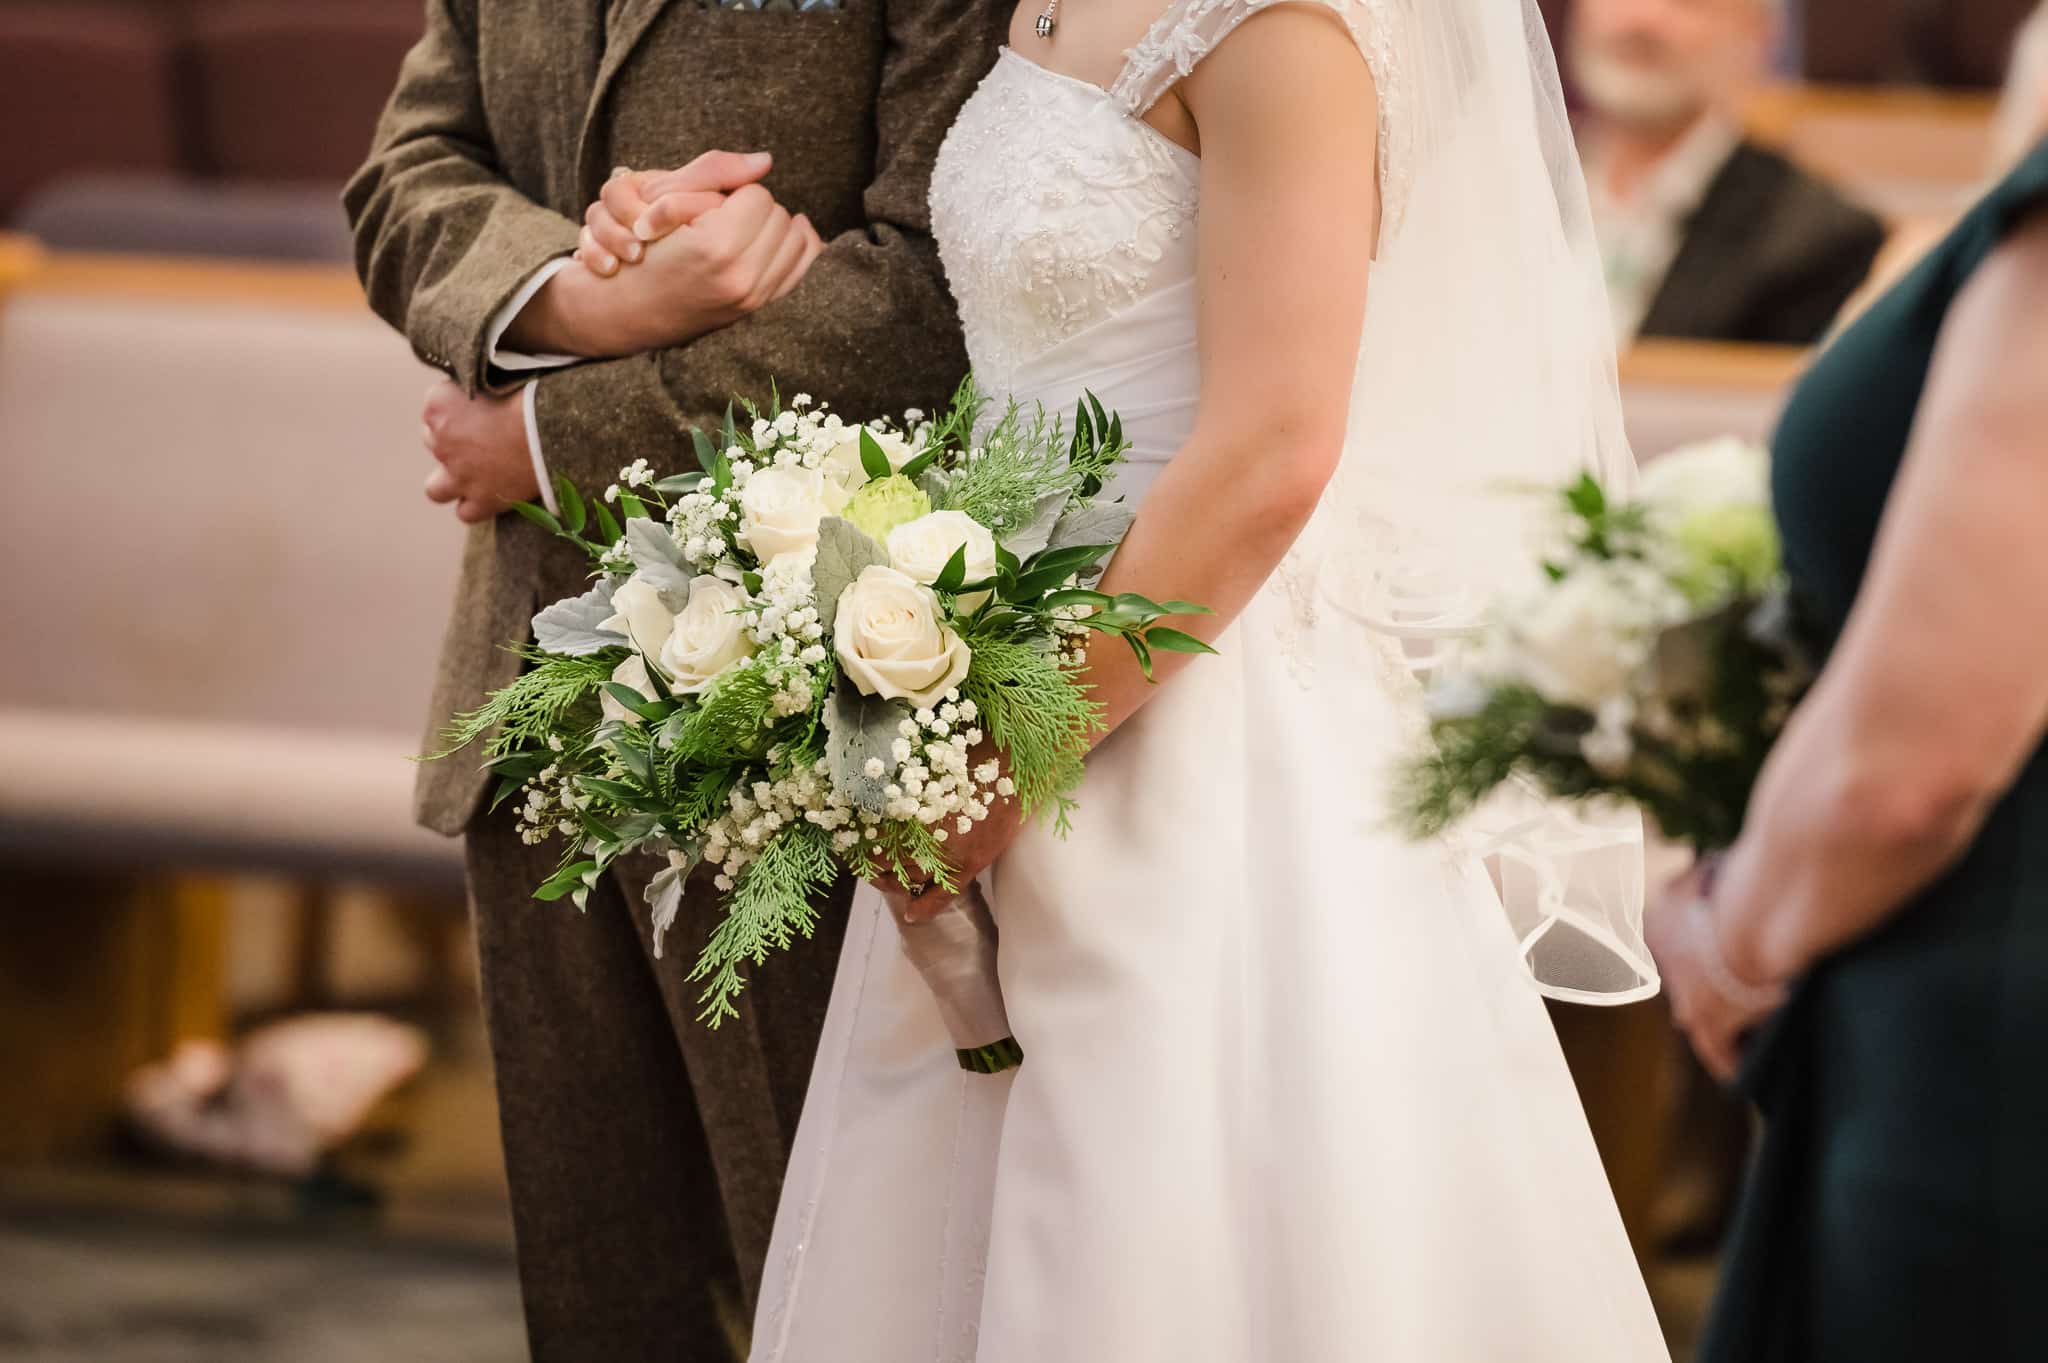 Close up of the bride and groom holding and squeezing their hands tightly together and the bridal bouquet.